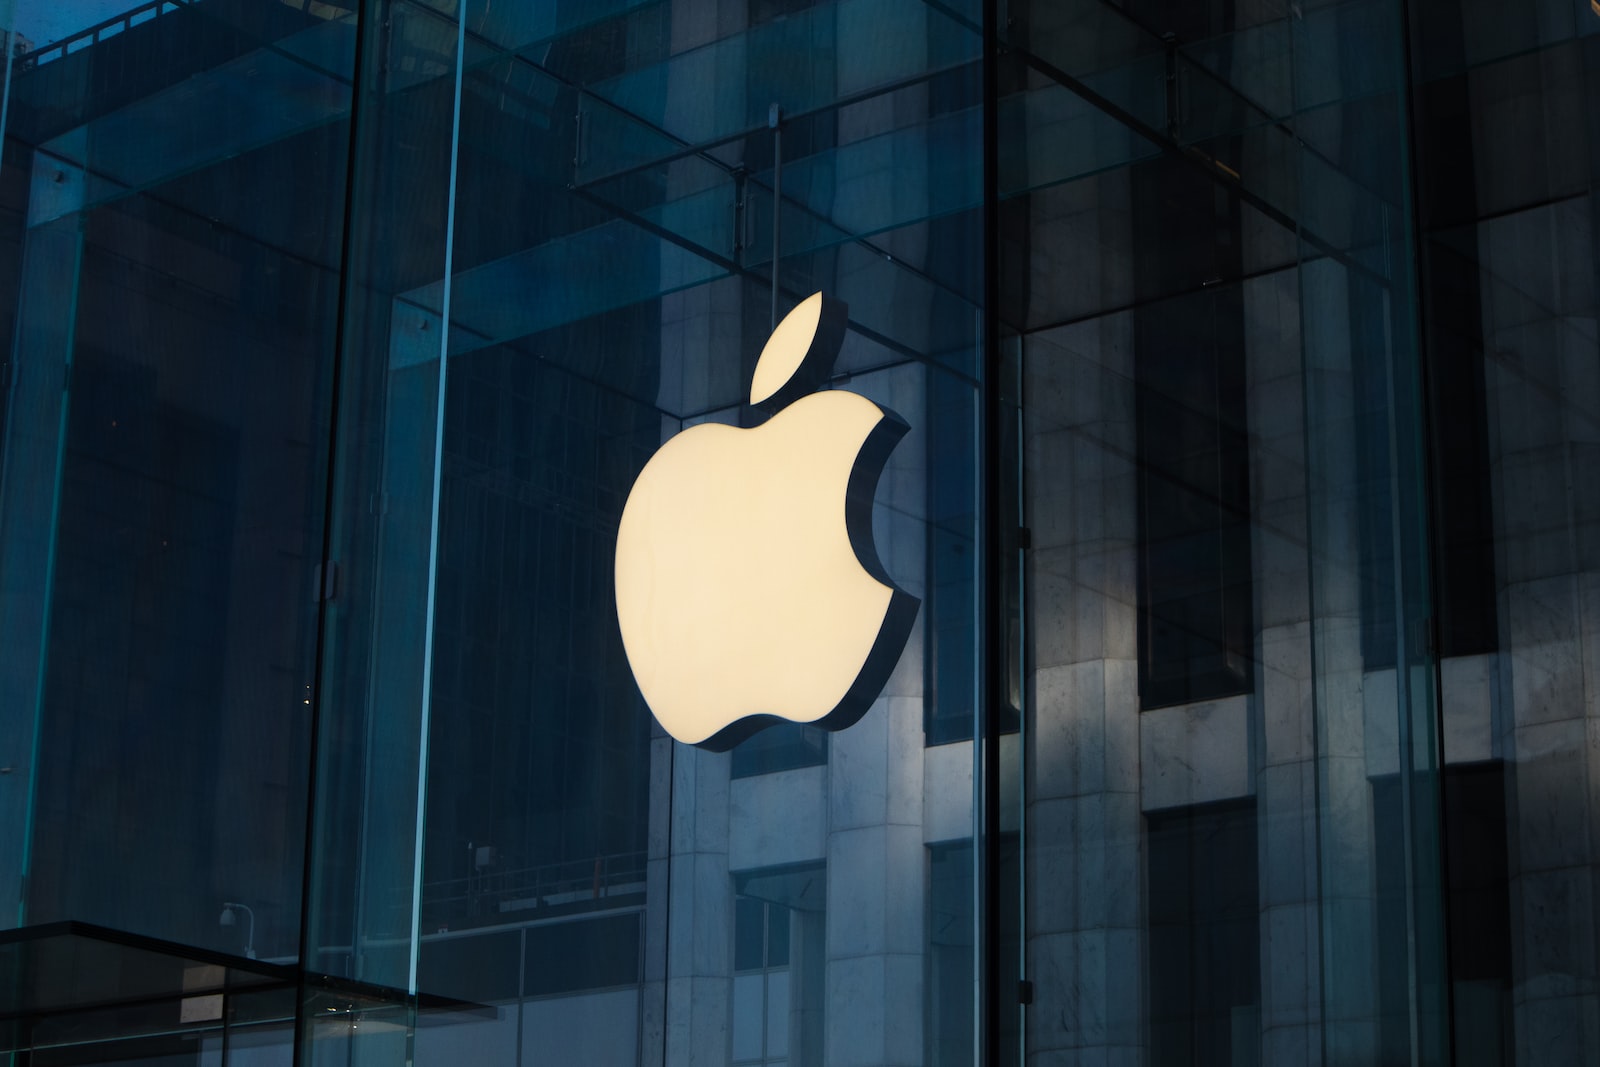 Apple Warns of Financial Impact from China COVID Disruption